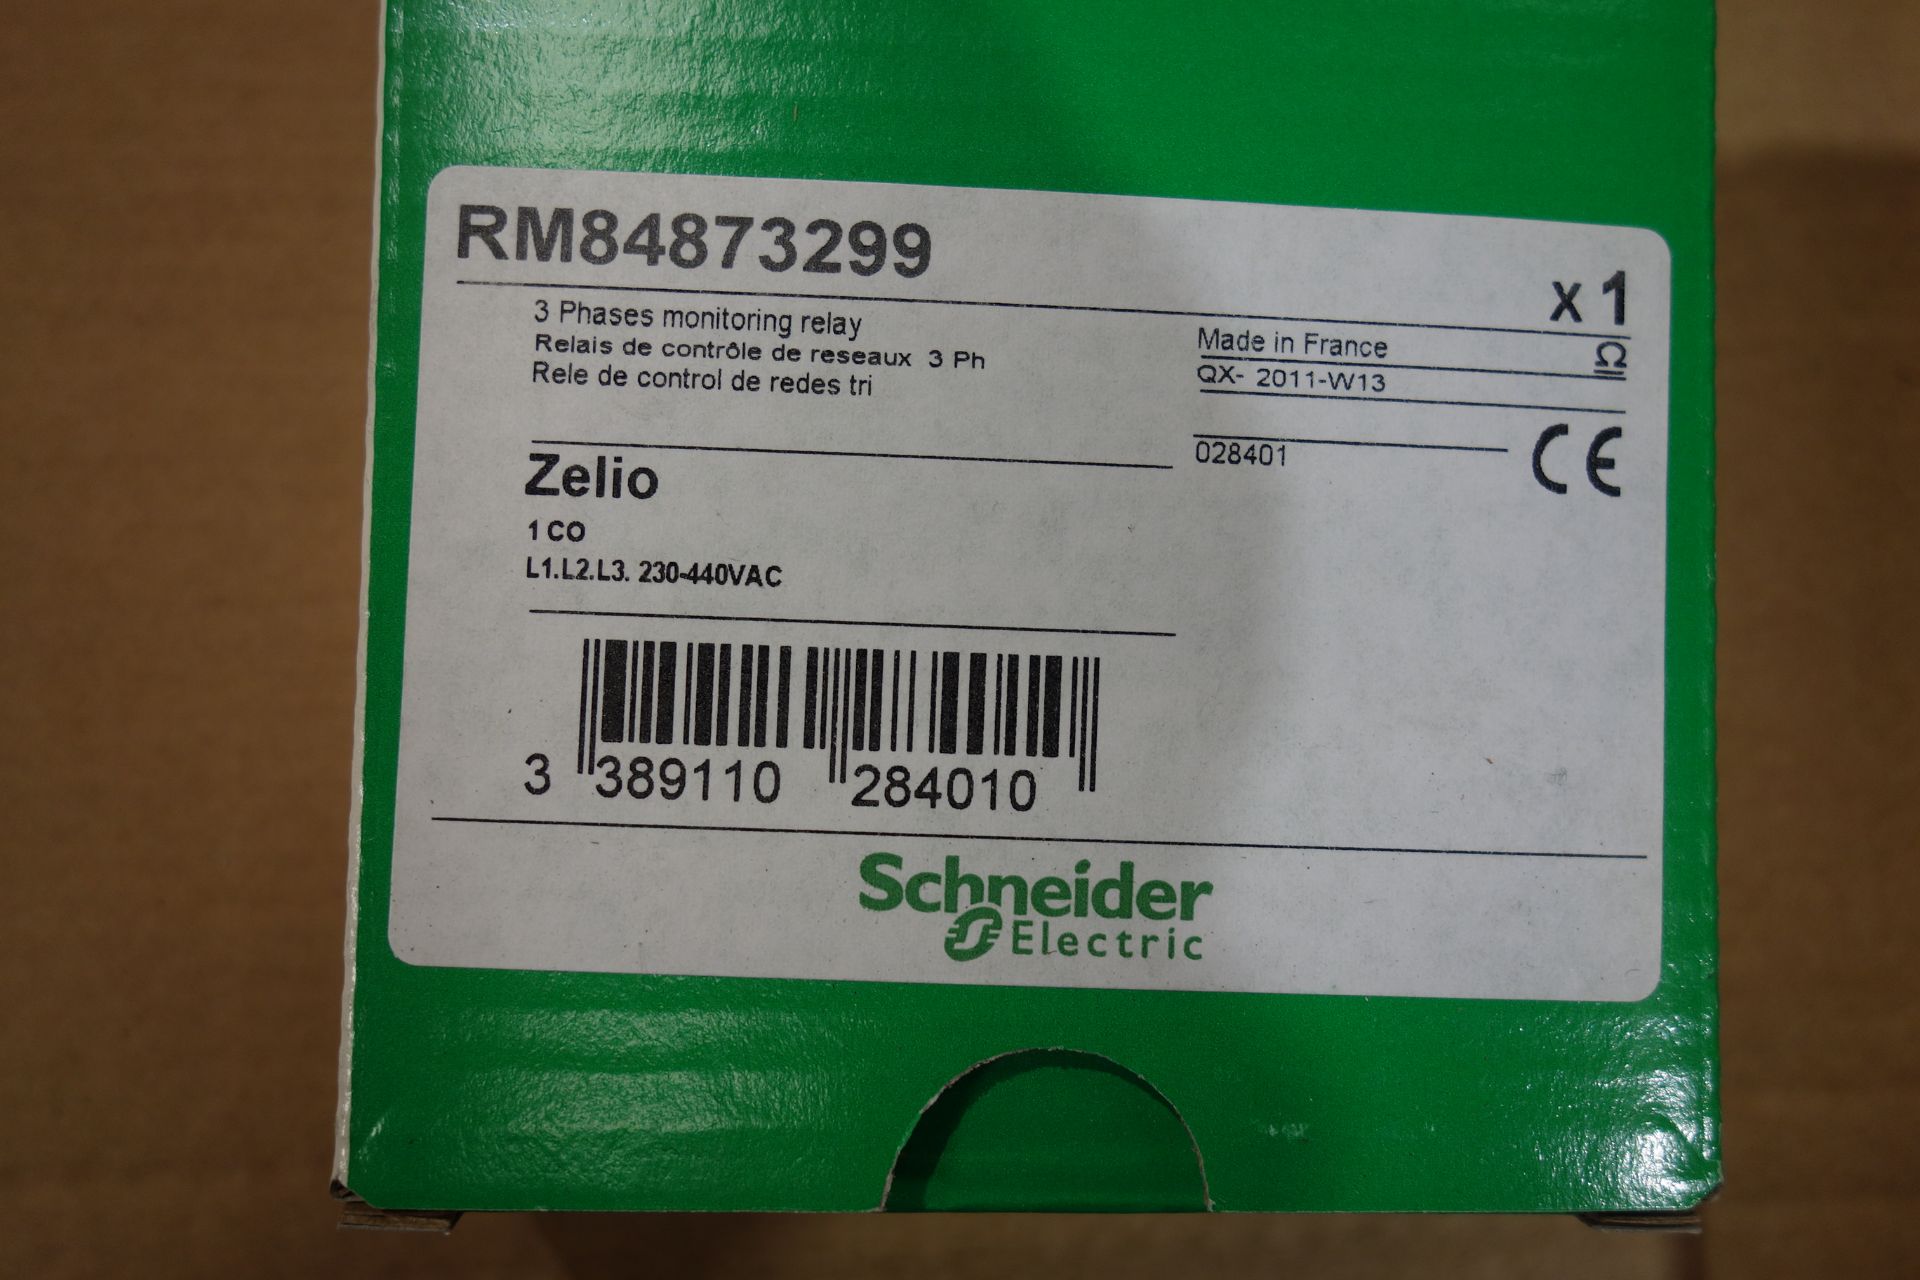 12 X Schneider RM84873299 3 Phases Monitoring Relay